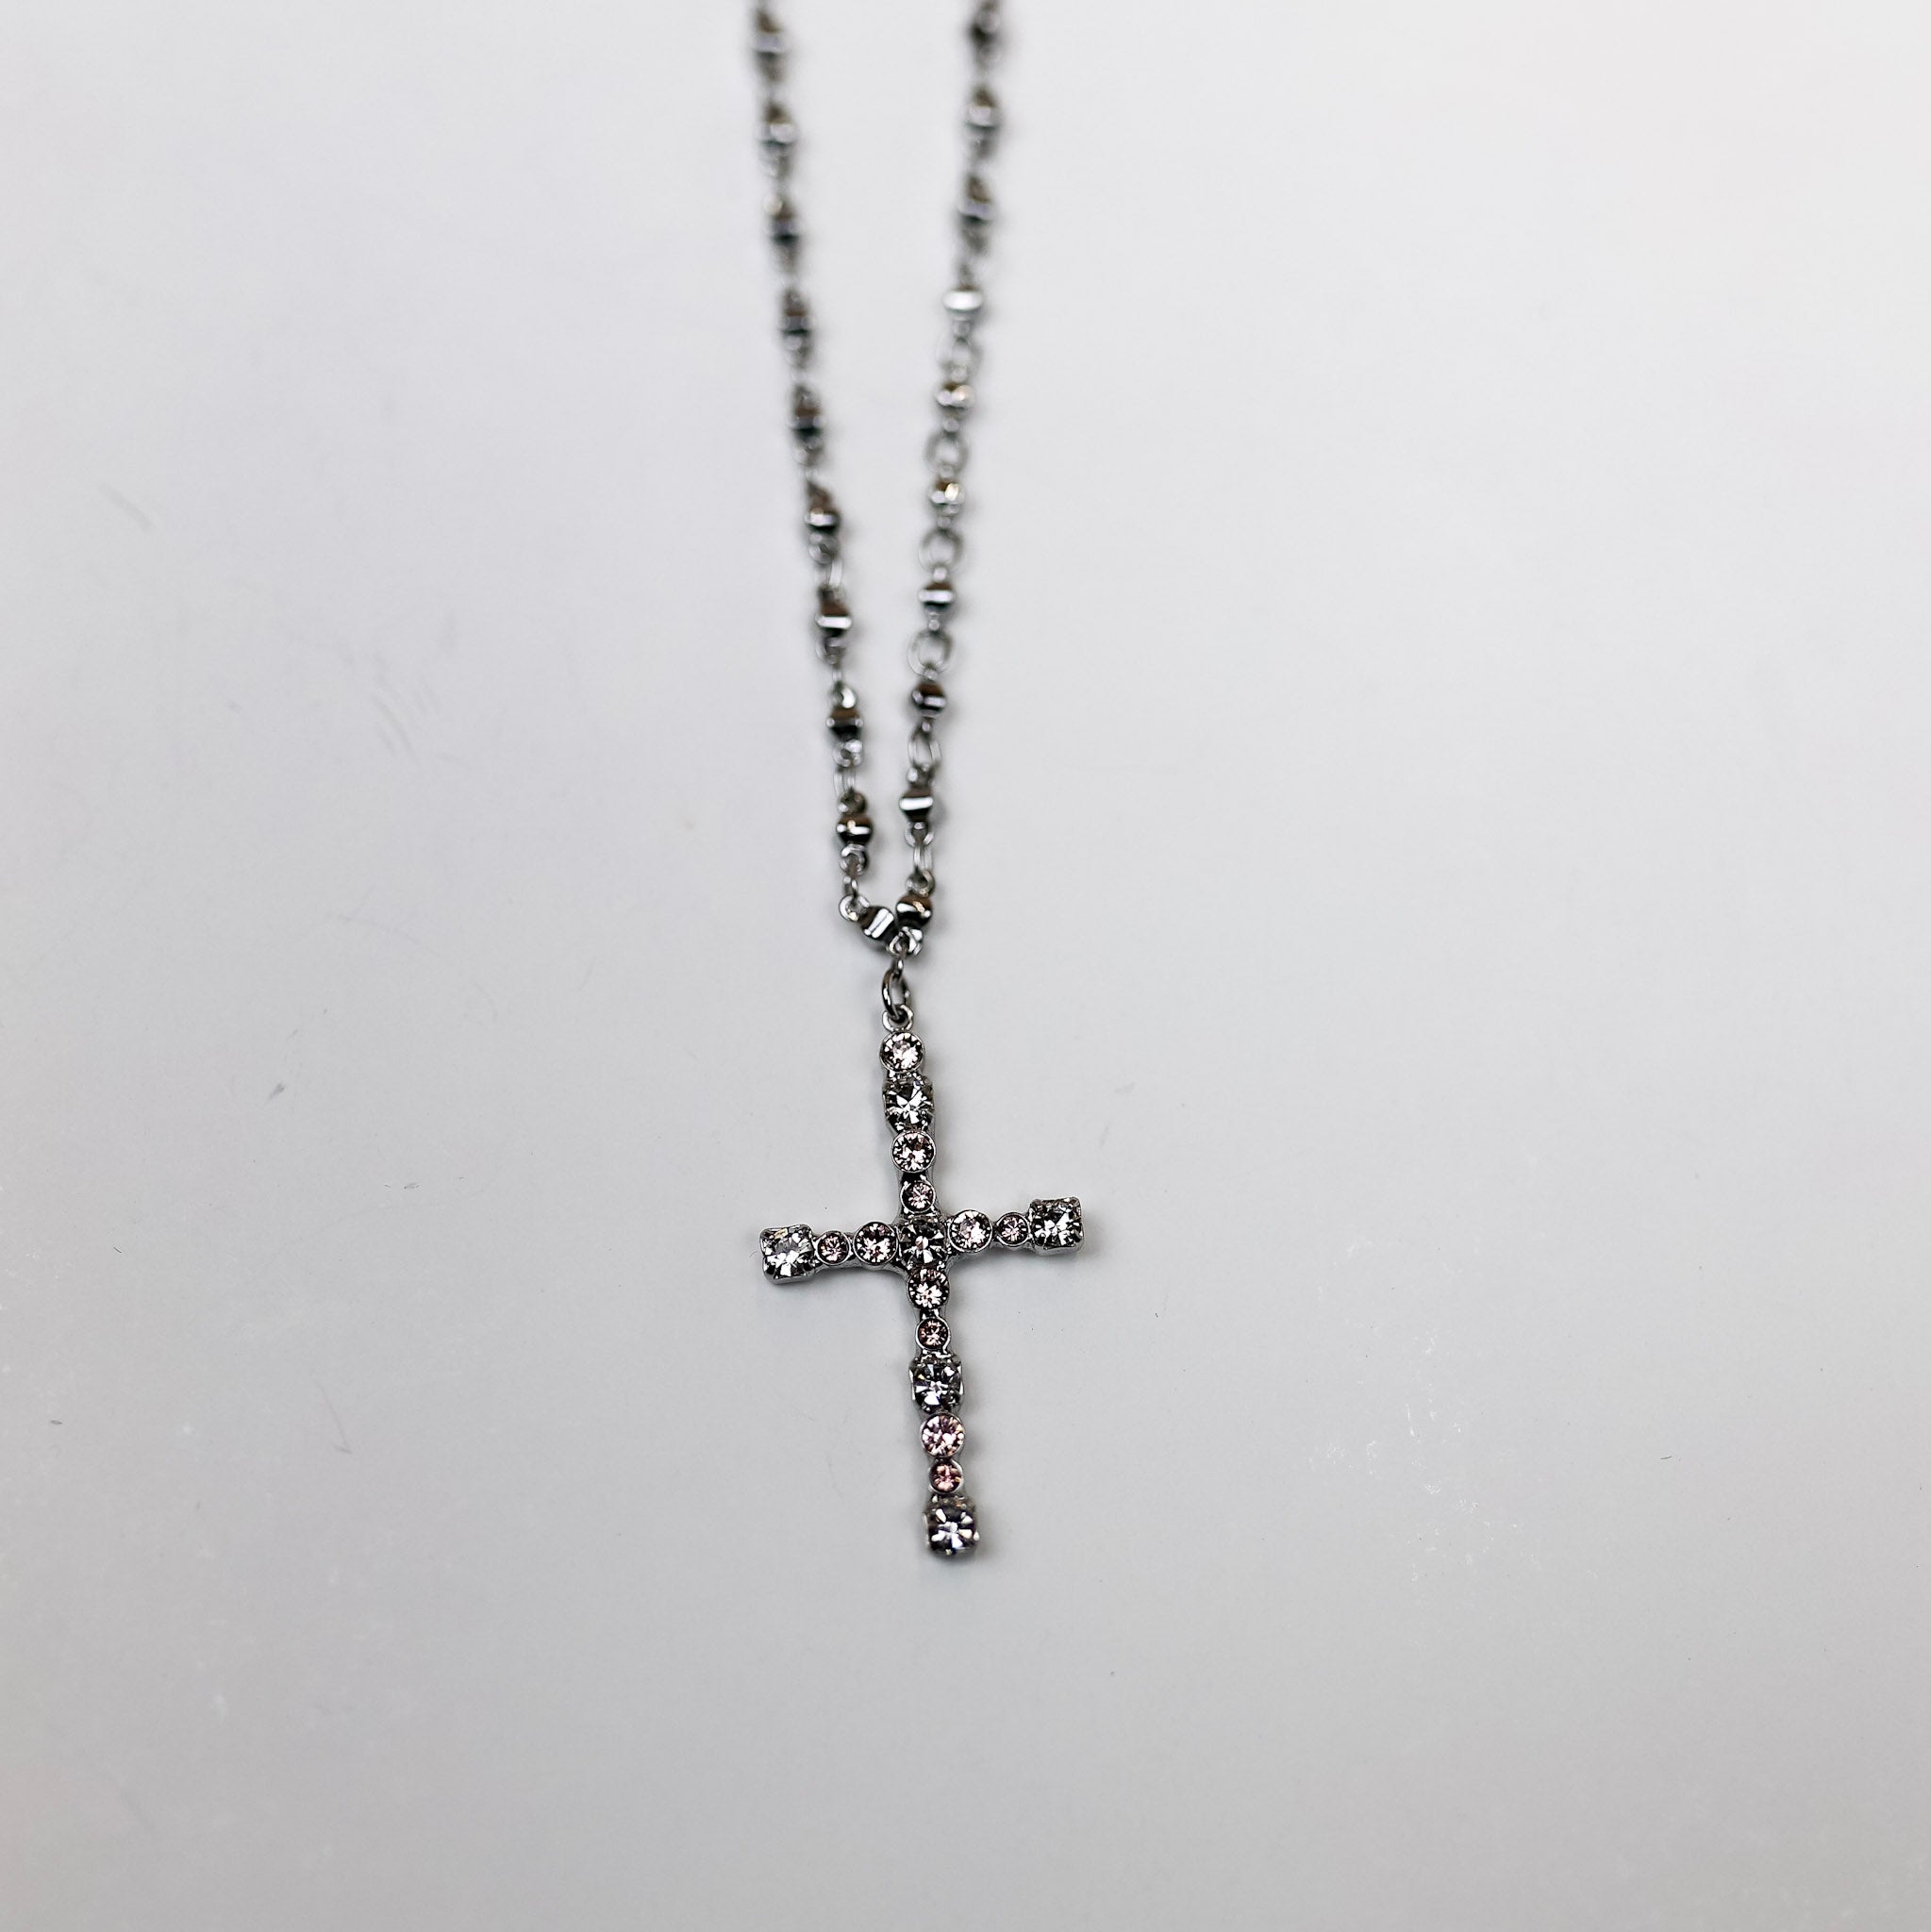 A silver-tone necklace with a Cross pendant that has crystals on it.